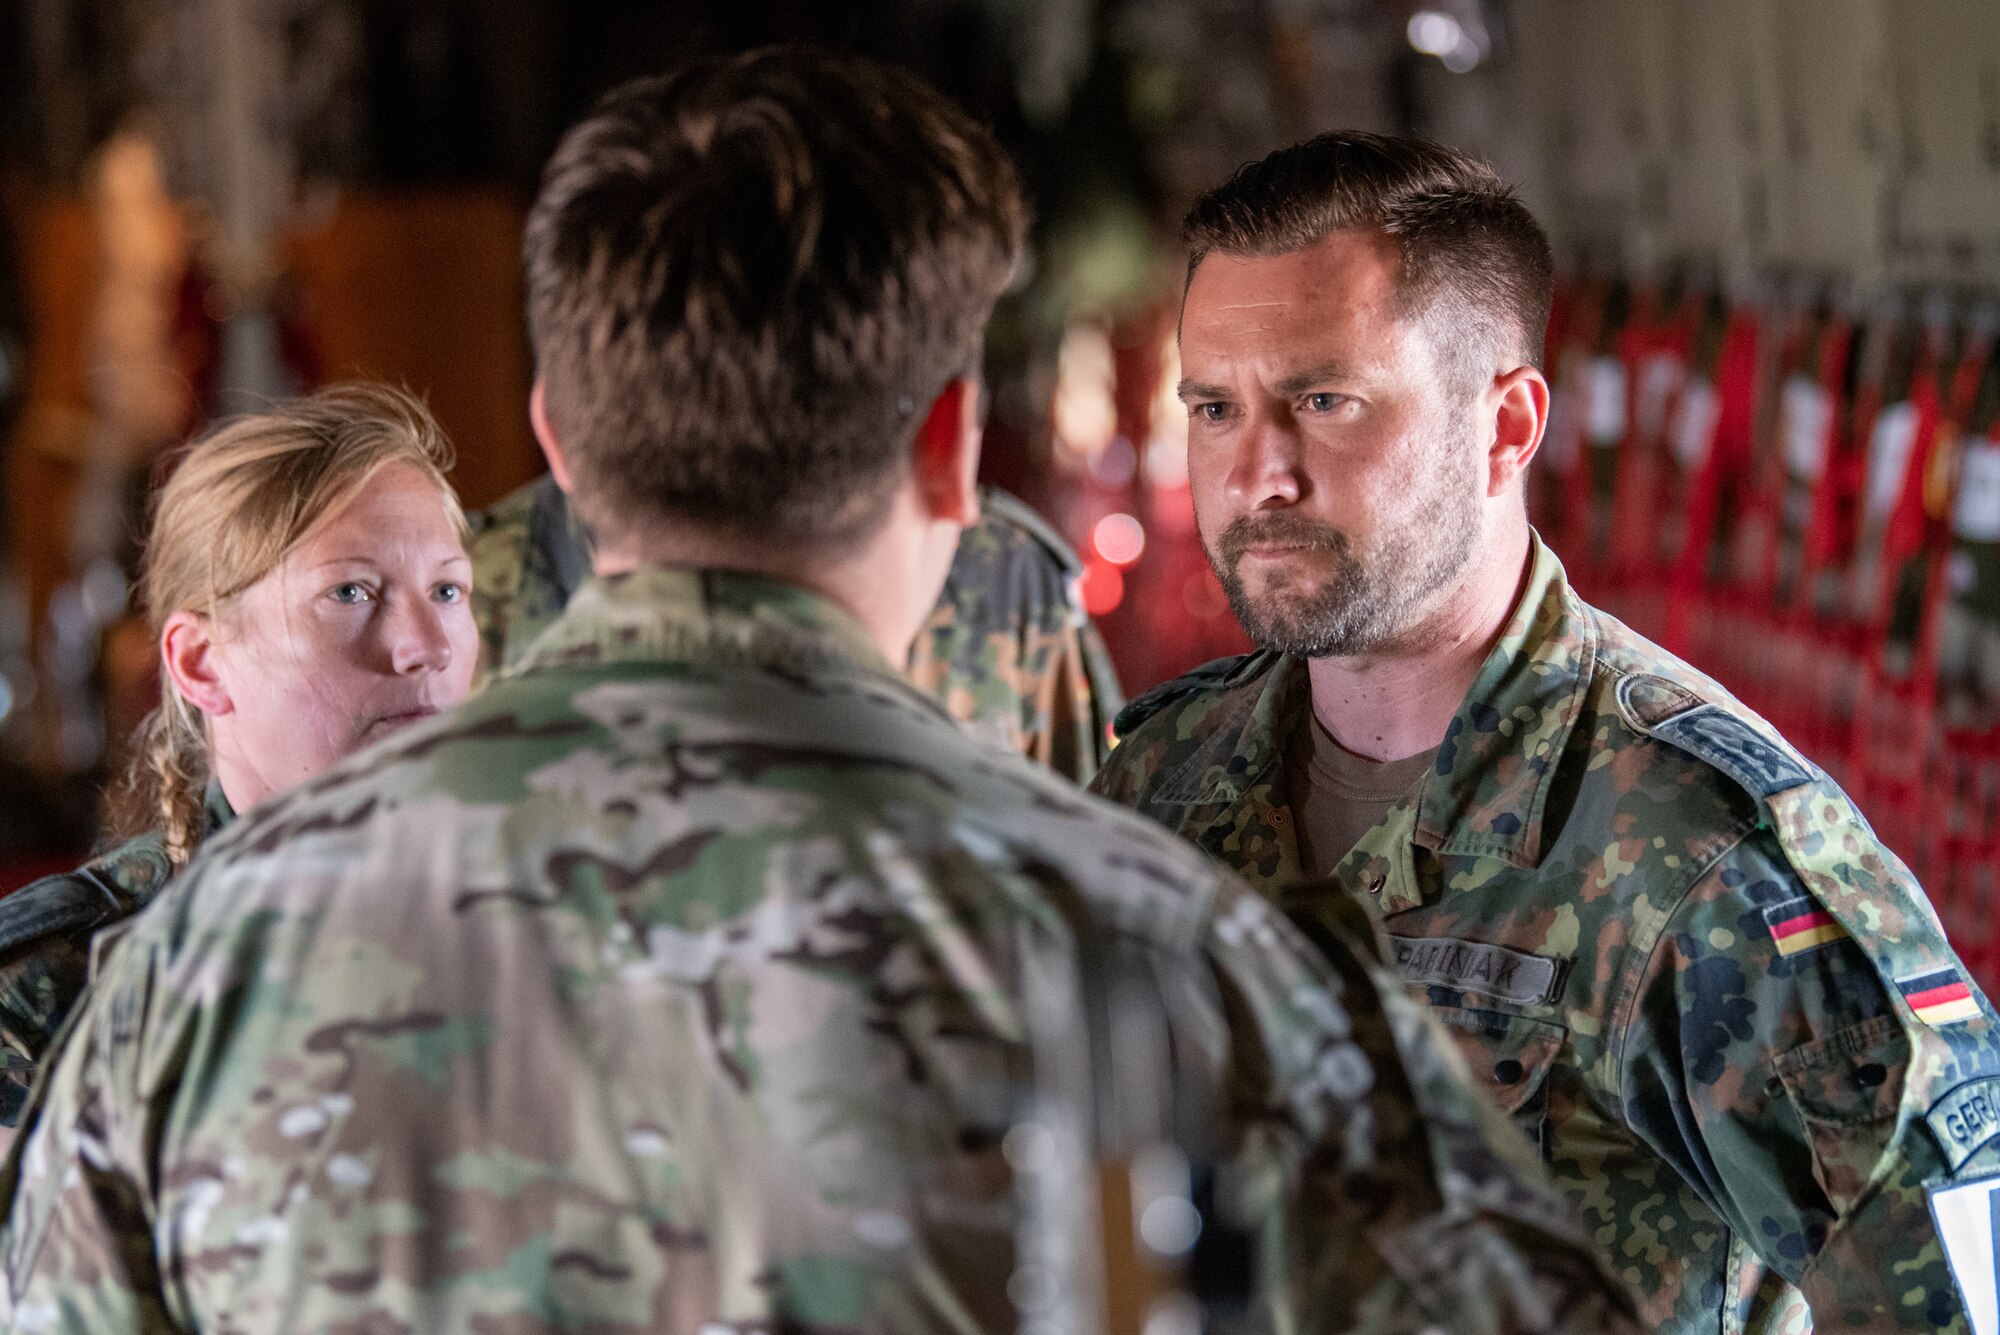 A U.S. Air Force tactical air control party Airman talks with German Armed Forces jumpmasters during exercise Air Defender 2023 in Saarbrucken, Germany, June 15, 2023. AD23 integrates both U.S. and allied air-power to defend shared values, while leveraging and strengthening vital partnerships to deter aggression around the world. (U.S. Air National Guard photo by Master Sgt. Phil Speck)